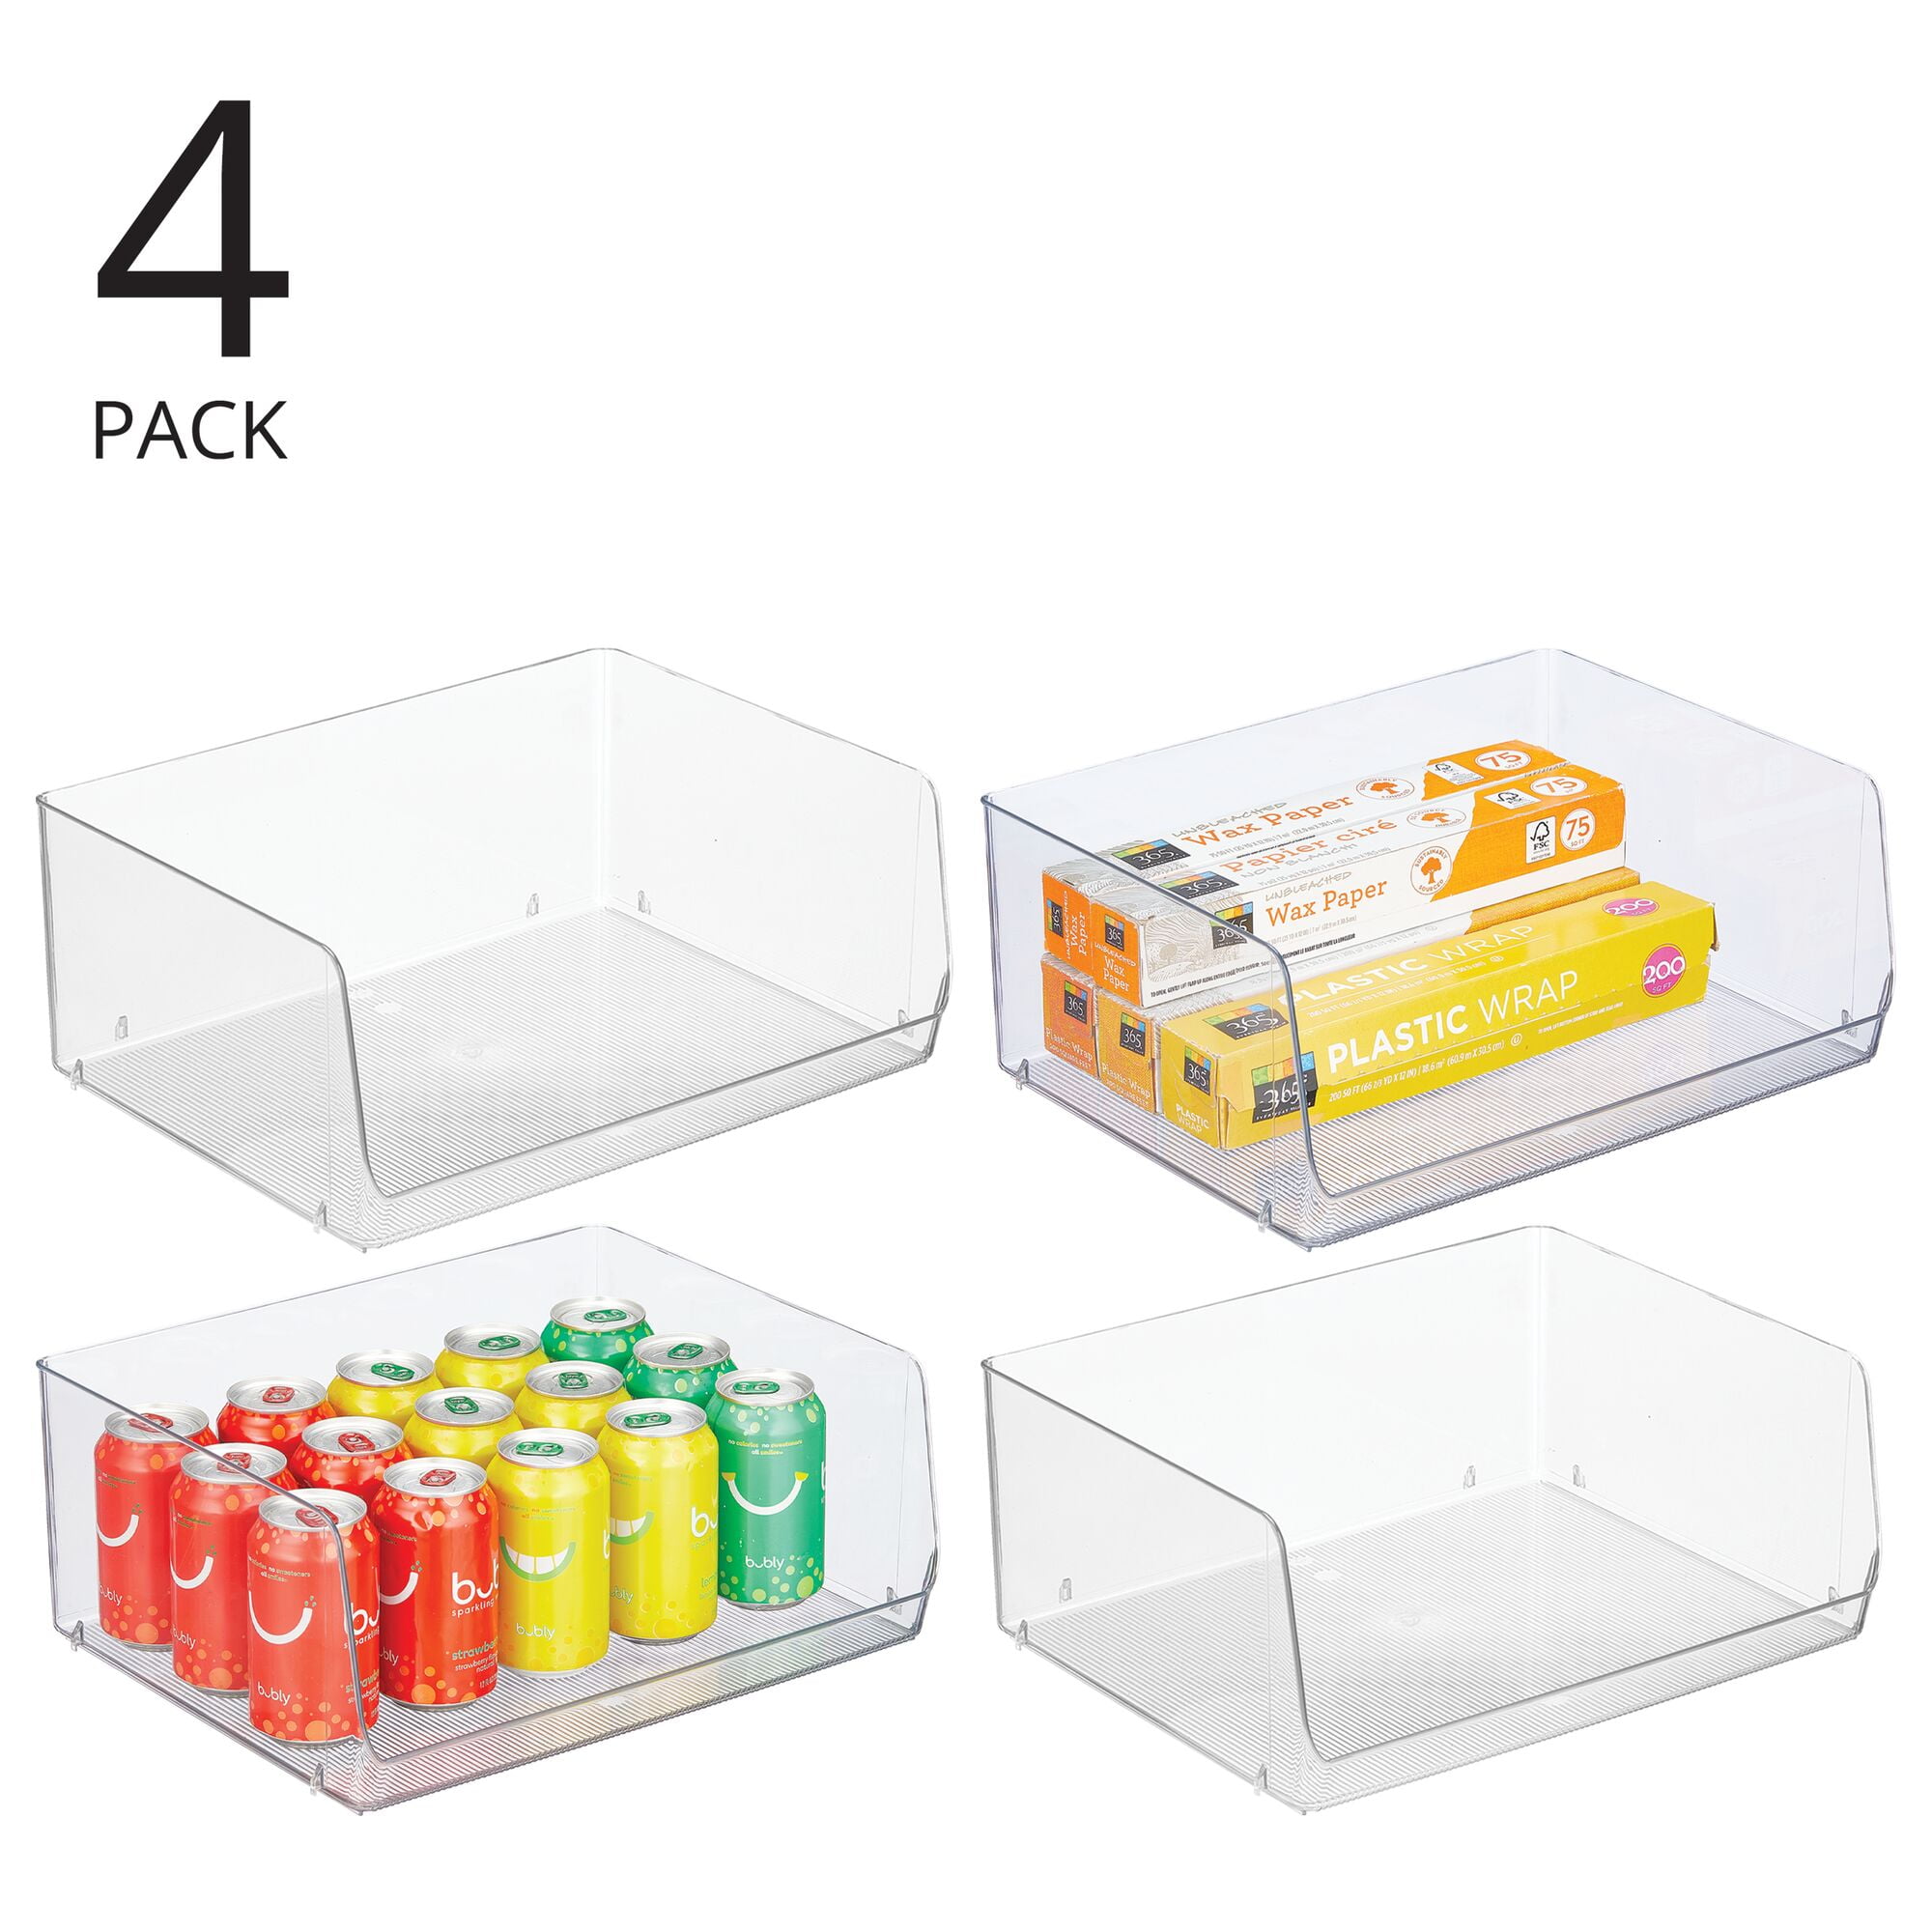 Maxi-Stor Extra Bin Wall Dividers - 4 Pack